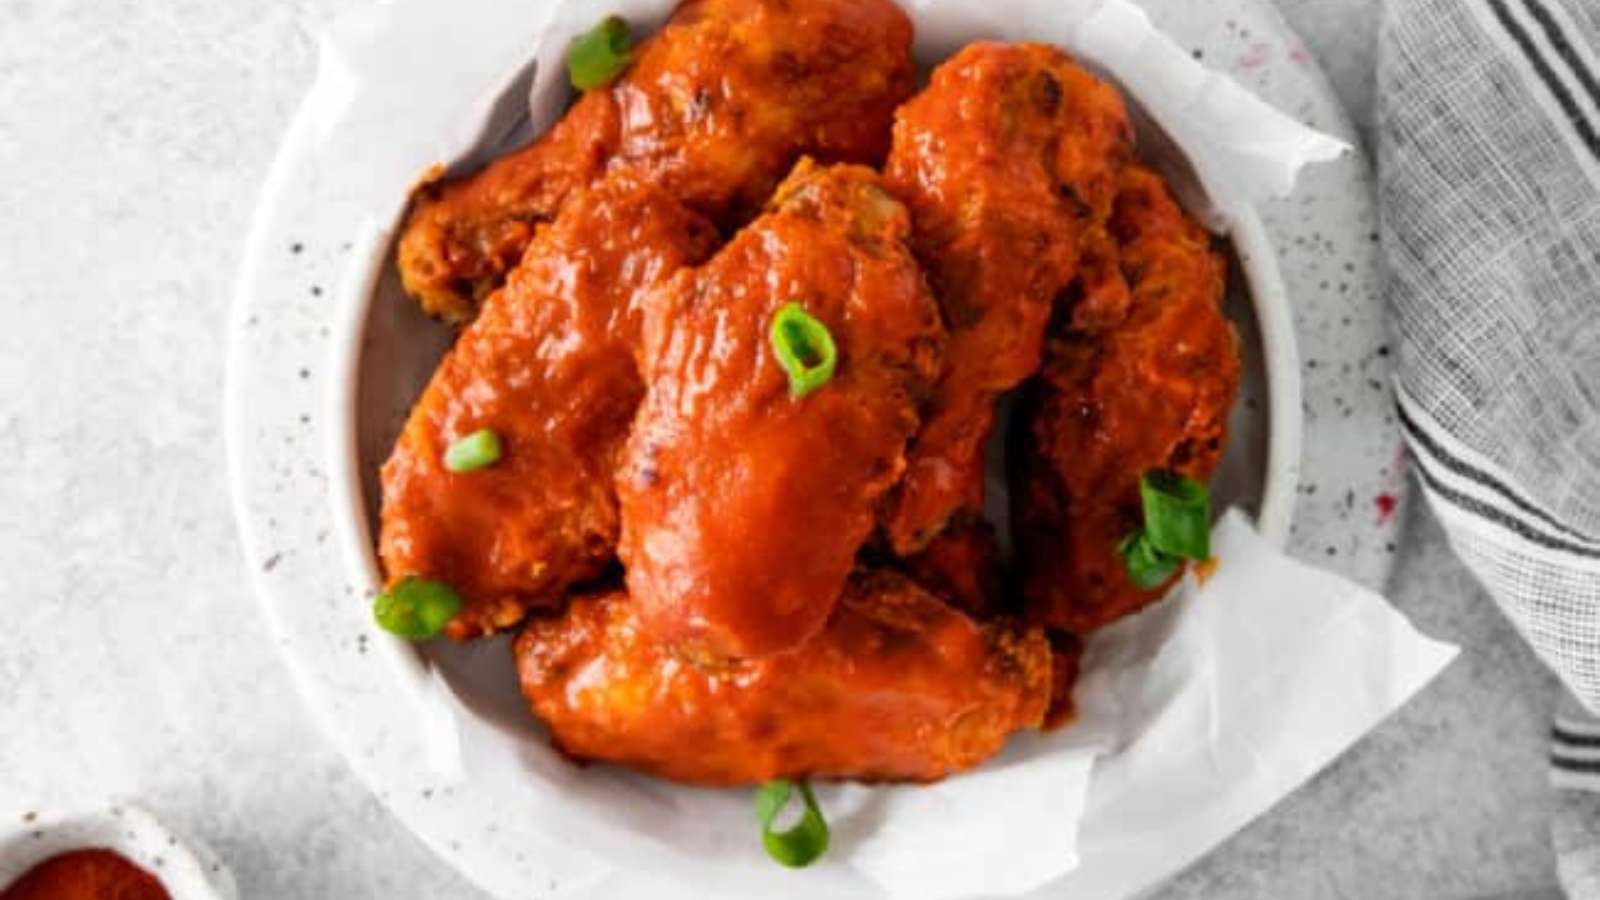 Buffalo chicken wings on a white plate.